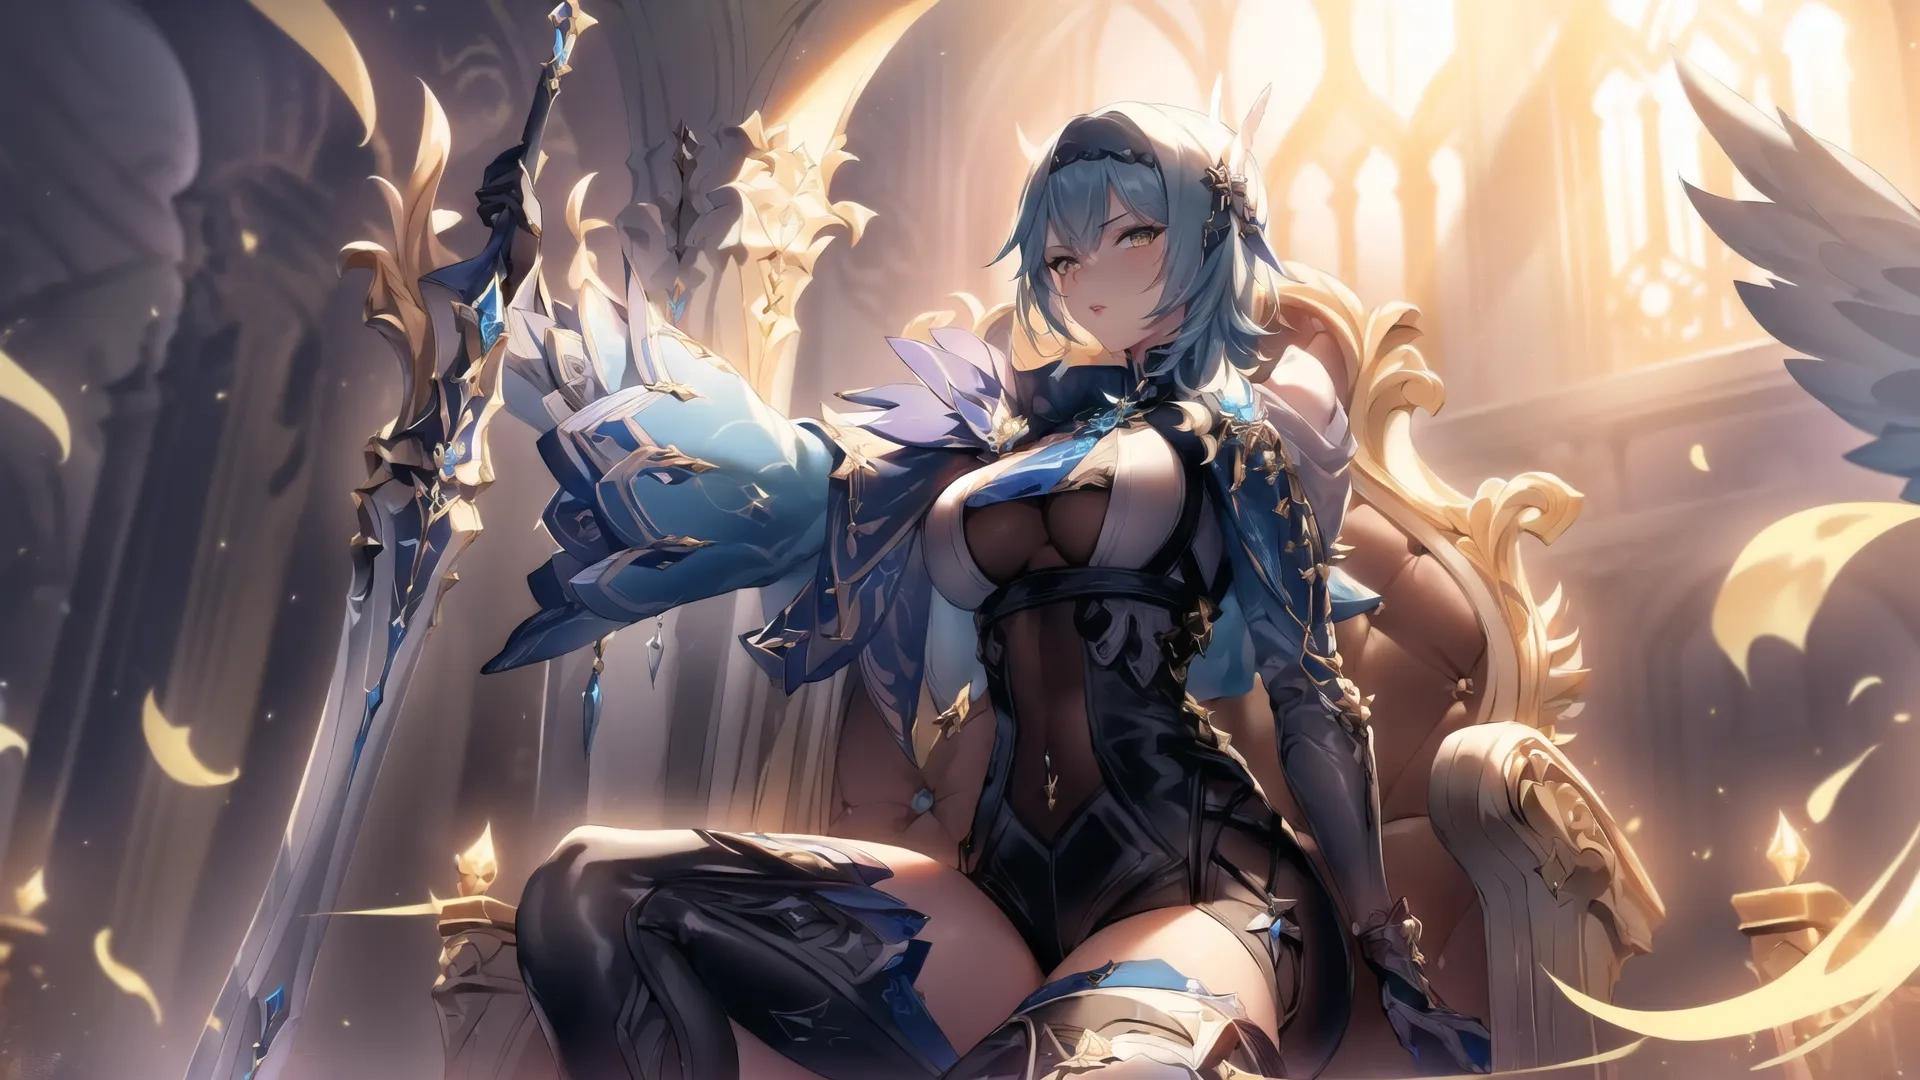 anime girl in a throne with wings above and a sword and flowers behind her seated and smiling for the camera, overlaid with artistic background lighting from other
